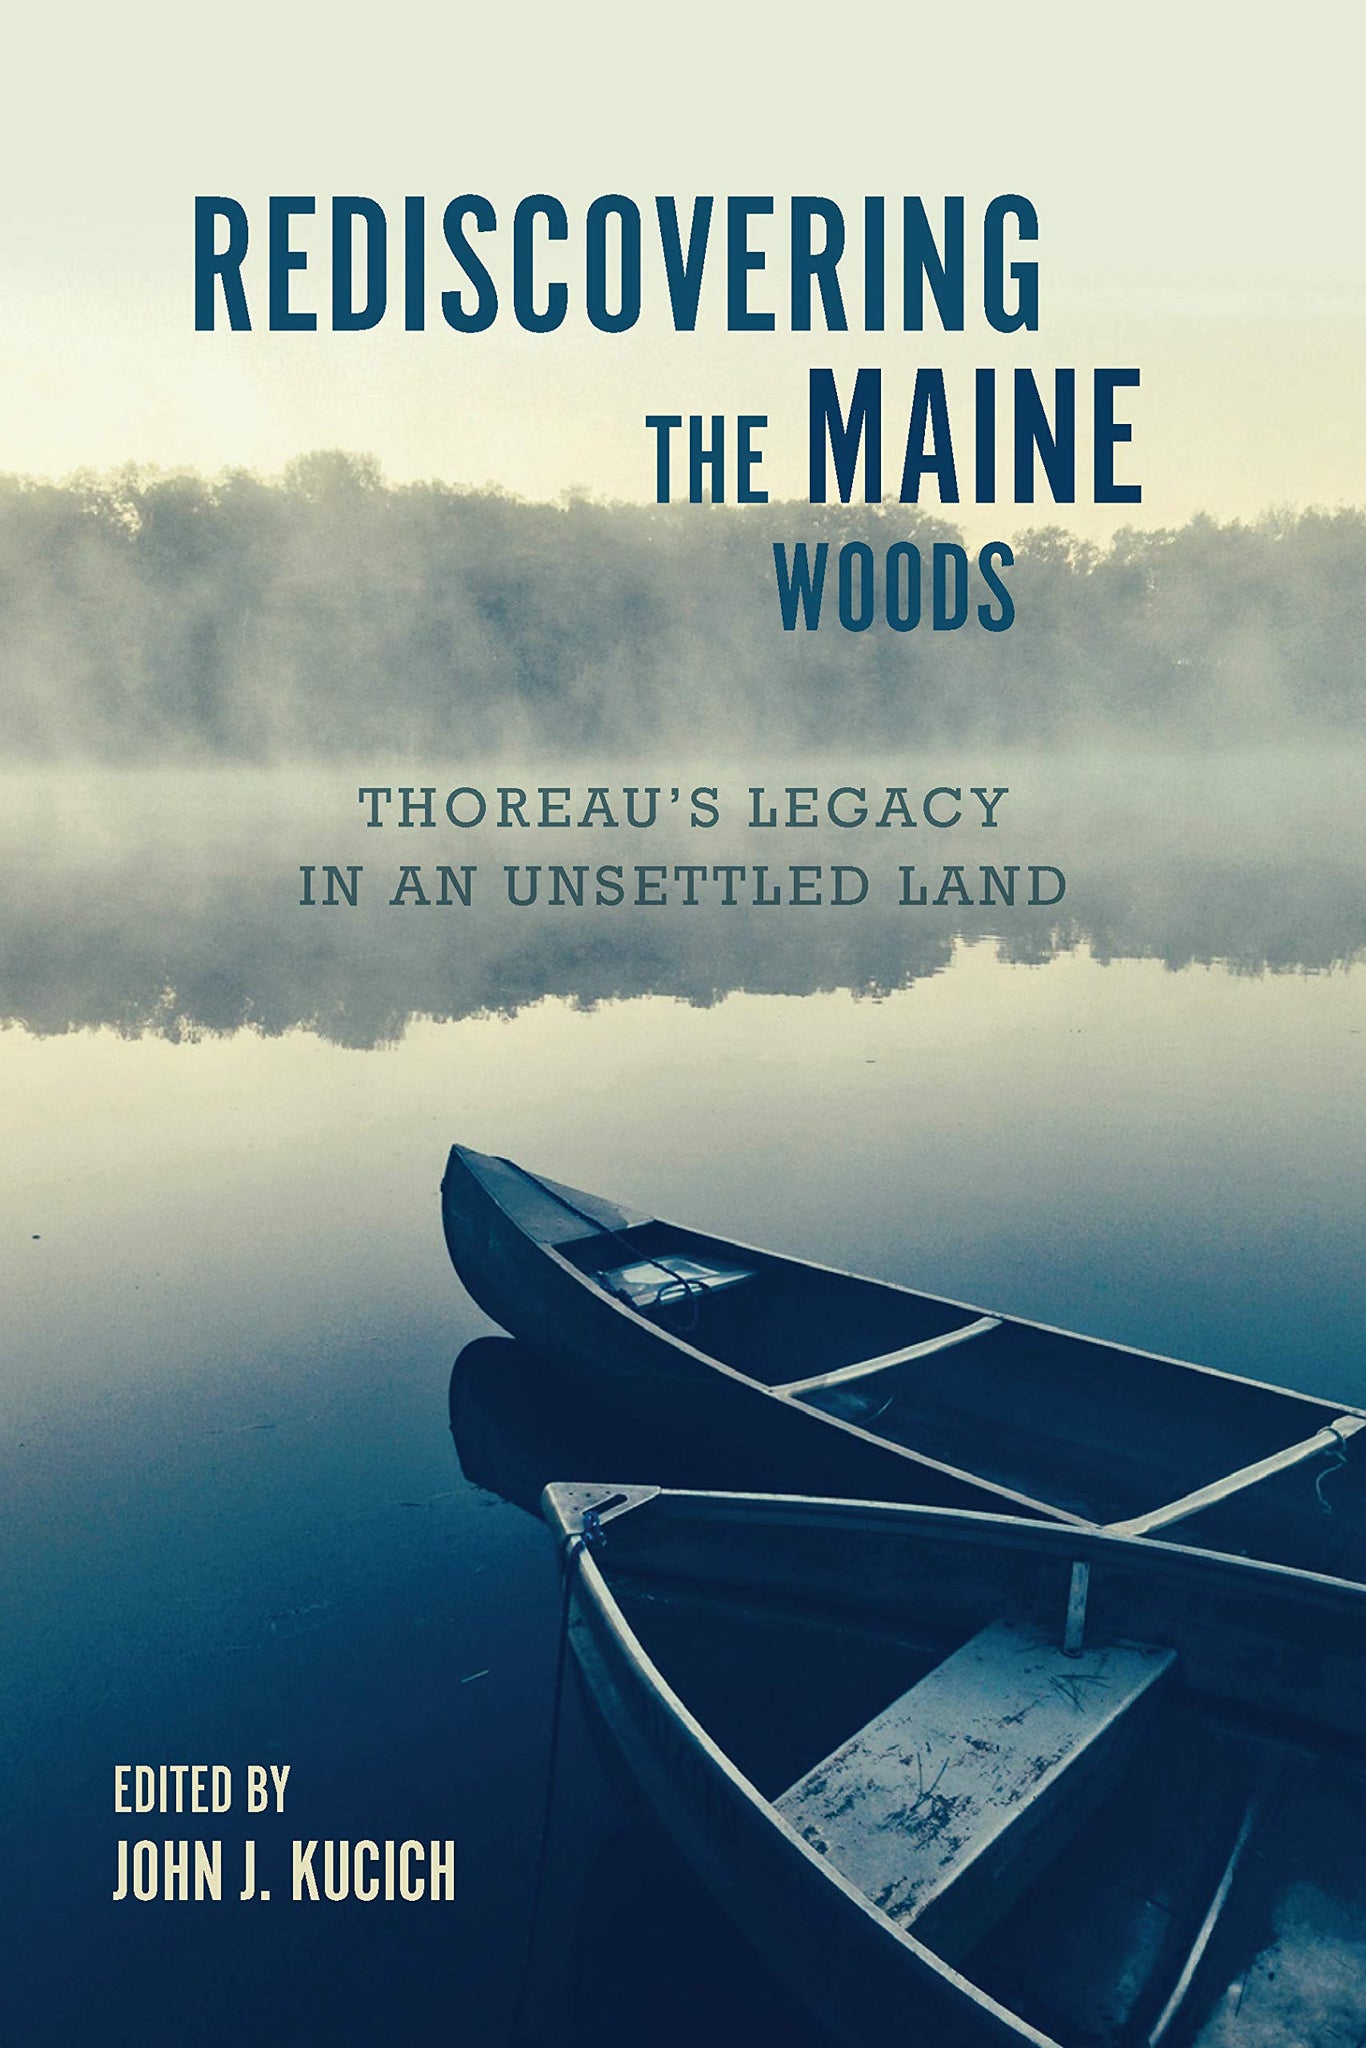 Rediscovering the Maine Woods : Thoreau's Legacy in an Unsettled Land by John J. Kucich